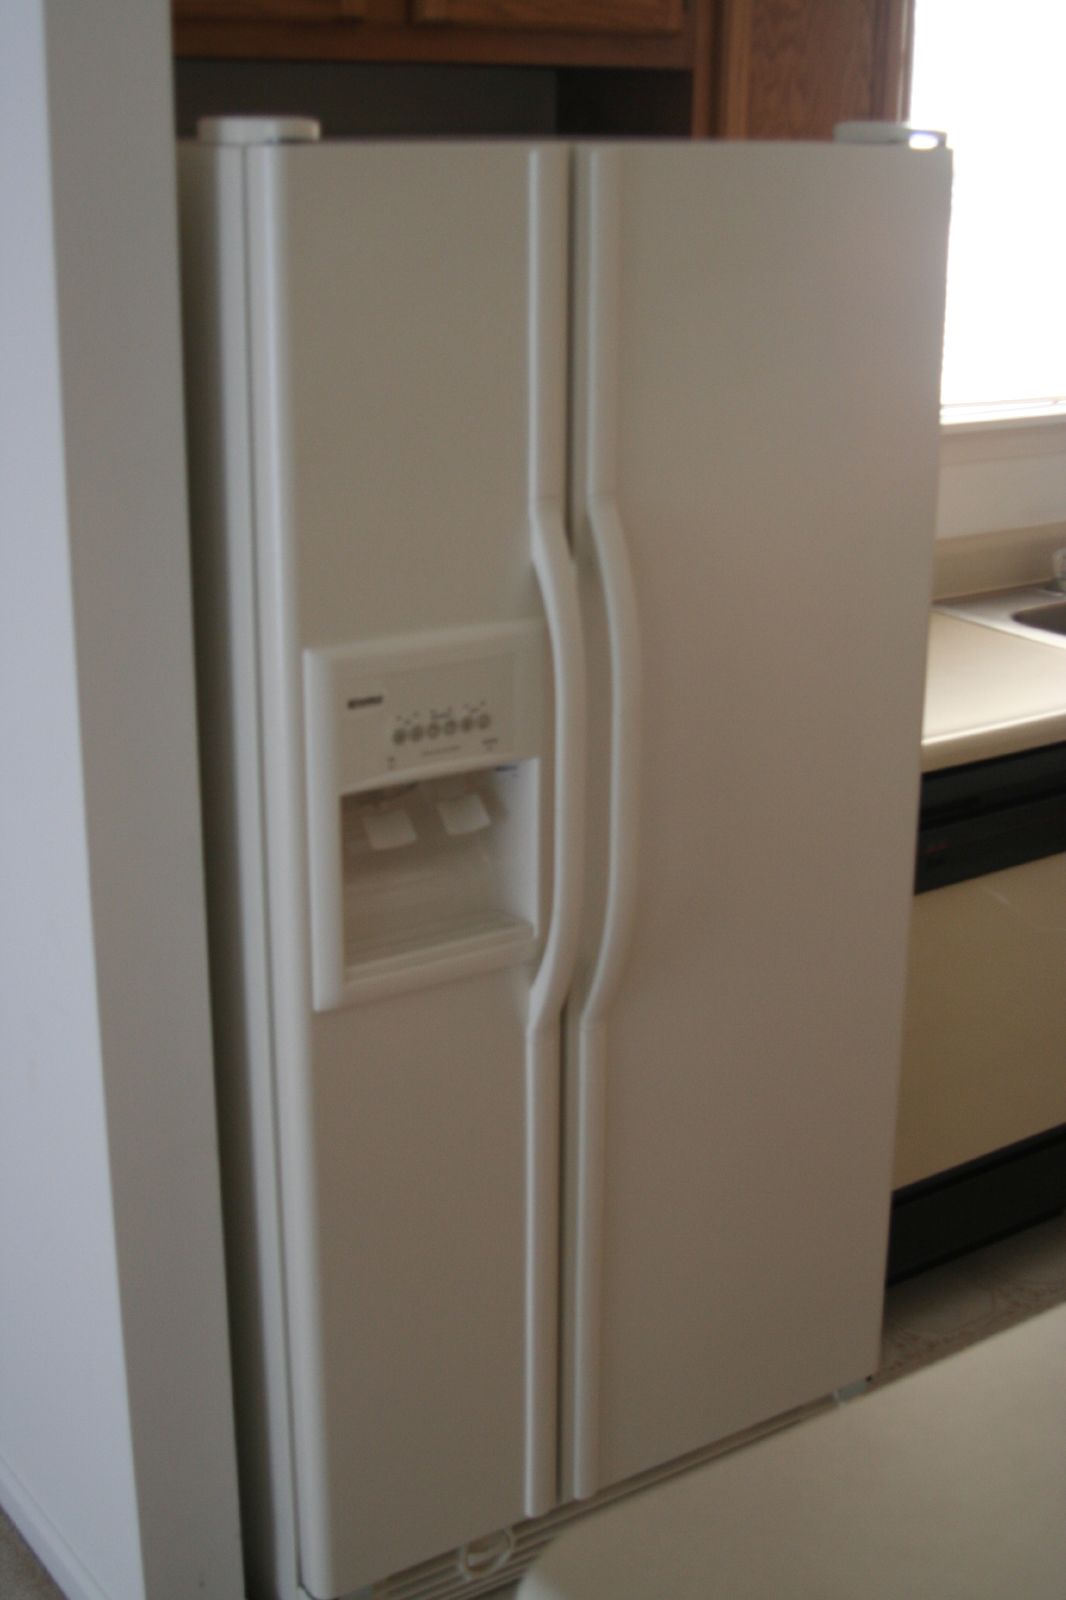 there is a small white refrigerator freezer on display